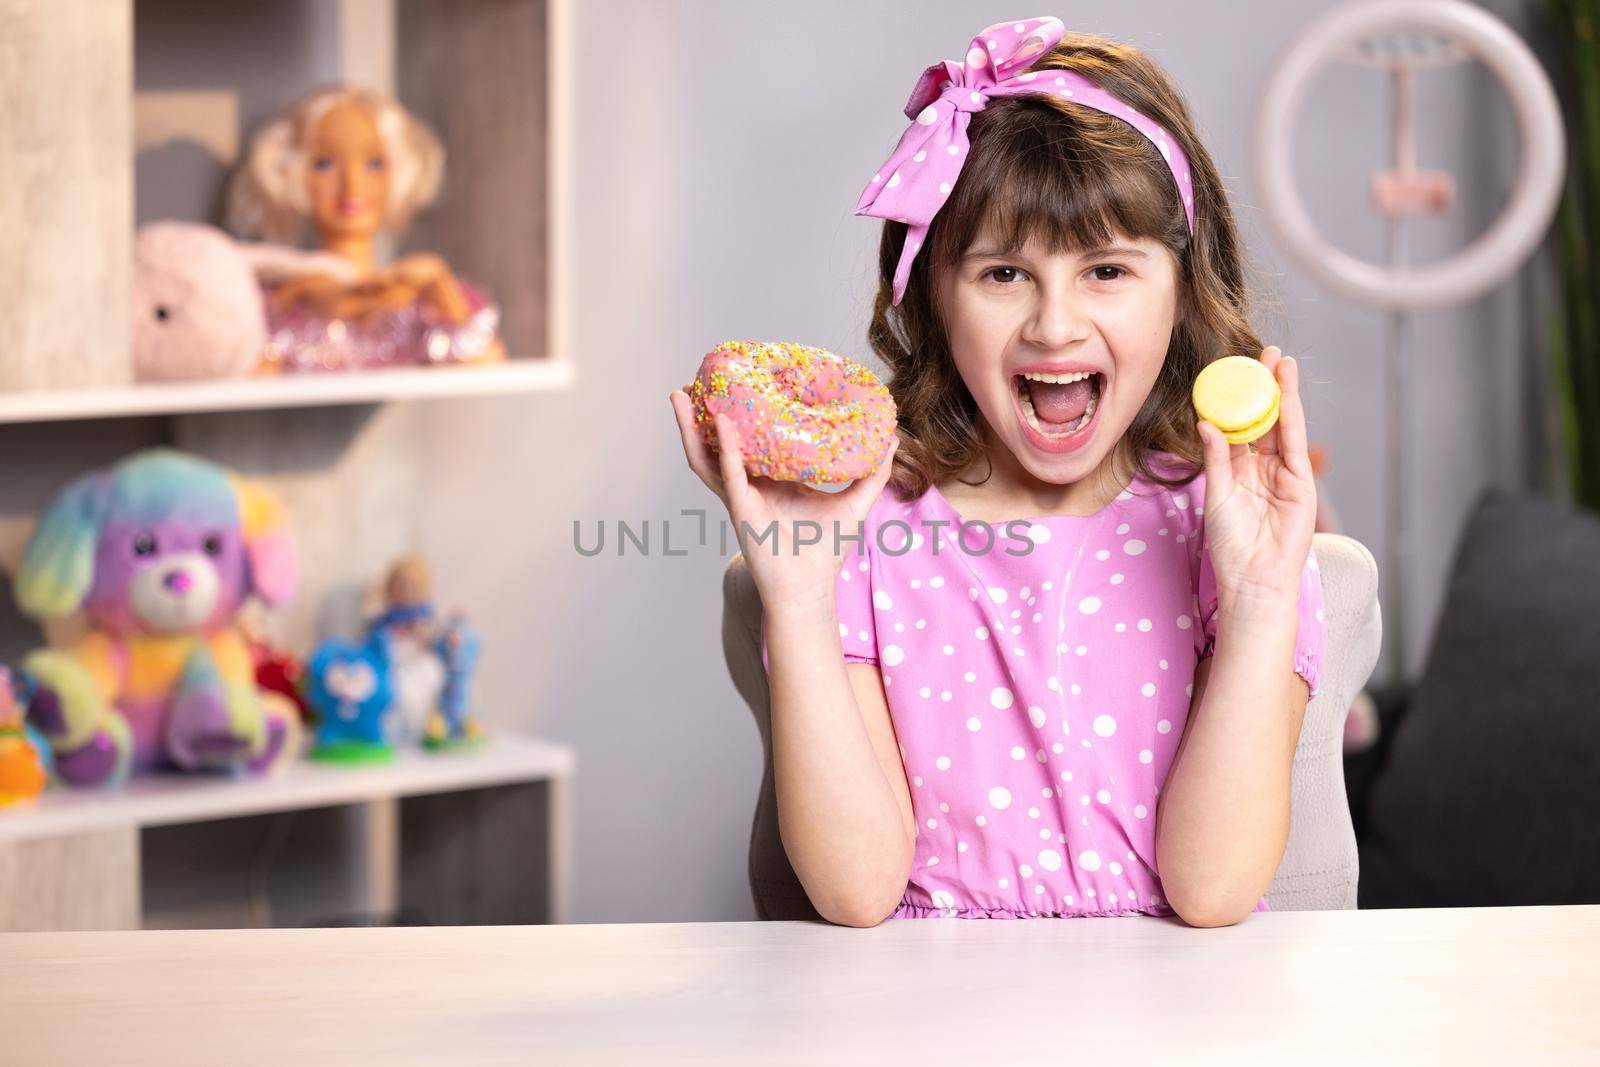 Cute little girl in pink dress holding macaron and donut in hands by the face. Adolescent school girl plays with sweet donuts doing happy fun face expressions on background. Funny concept with sweets.